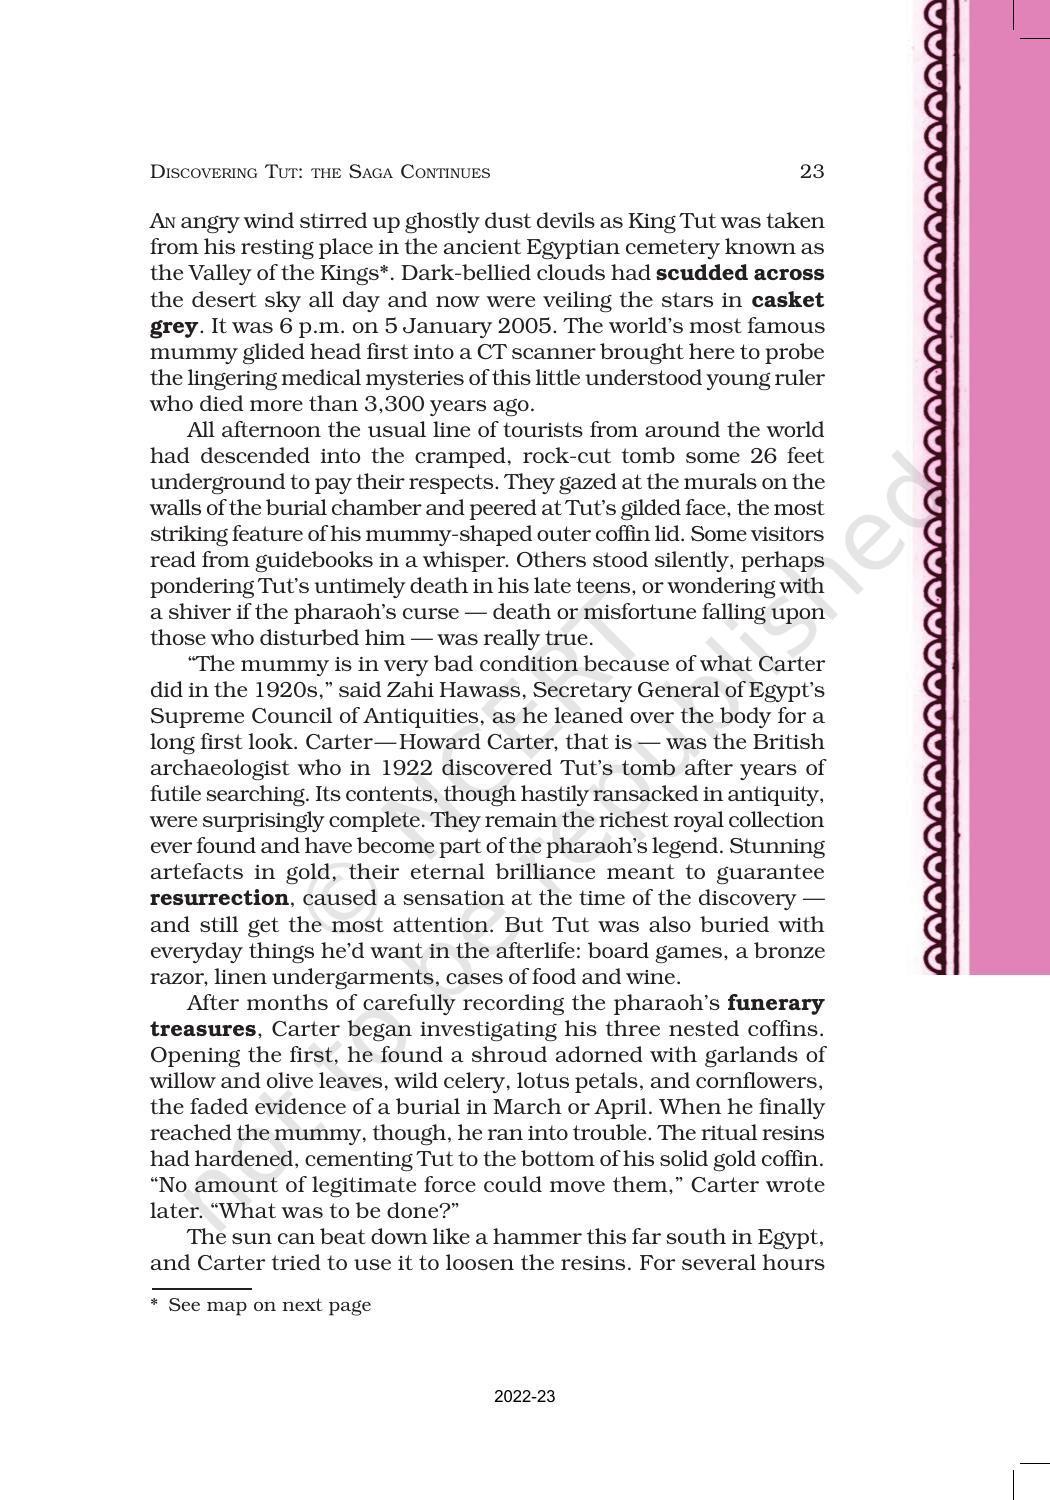 NCERT Book for Class 11 English Hornbill Chapter 3 Discovering Tut: The Saga Continues - Page 2